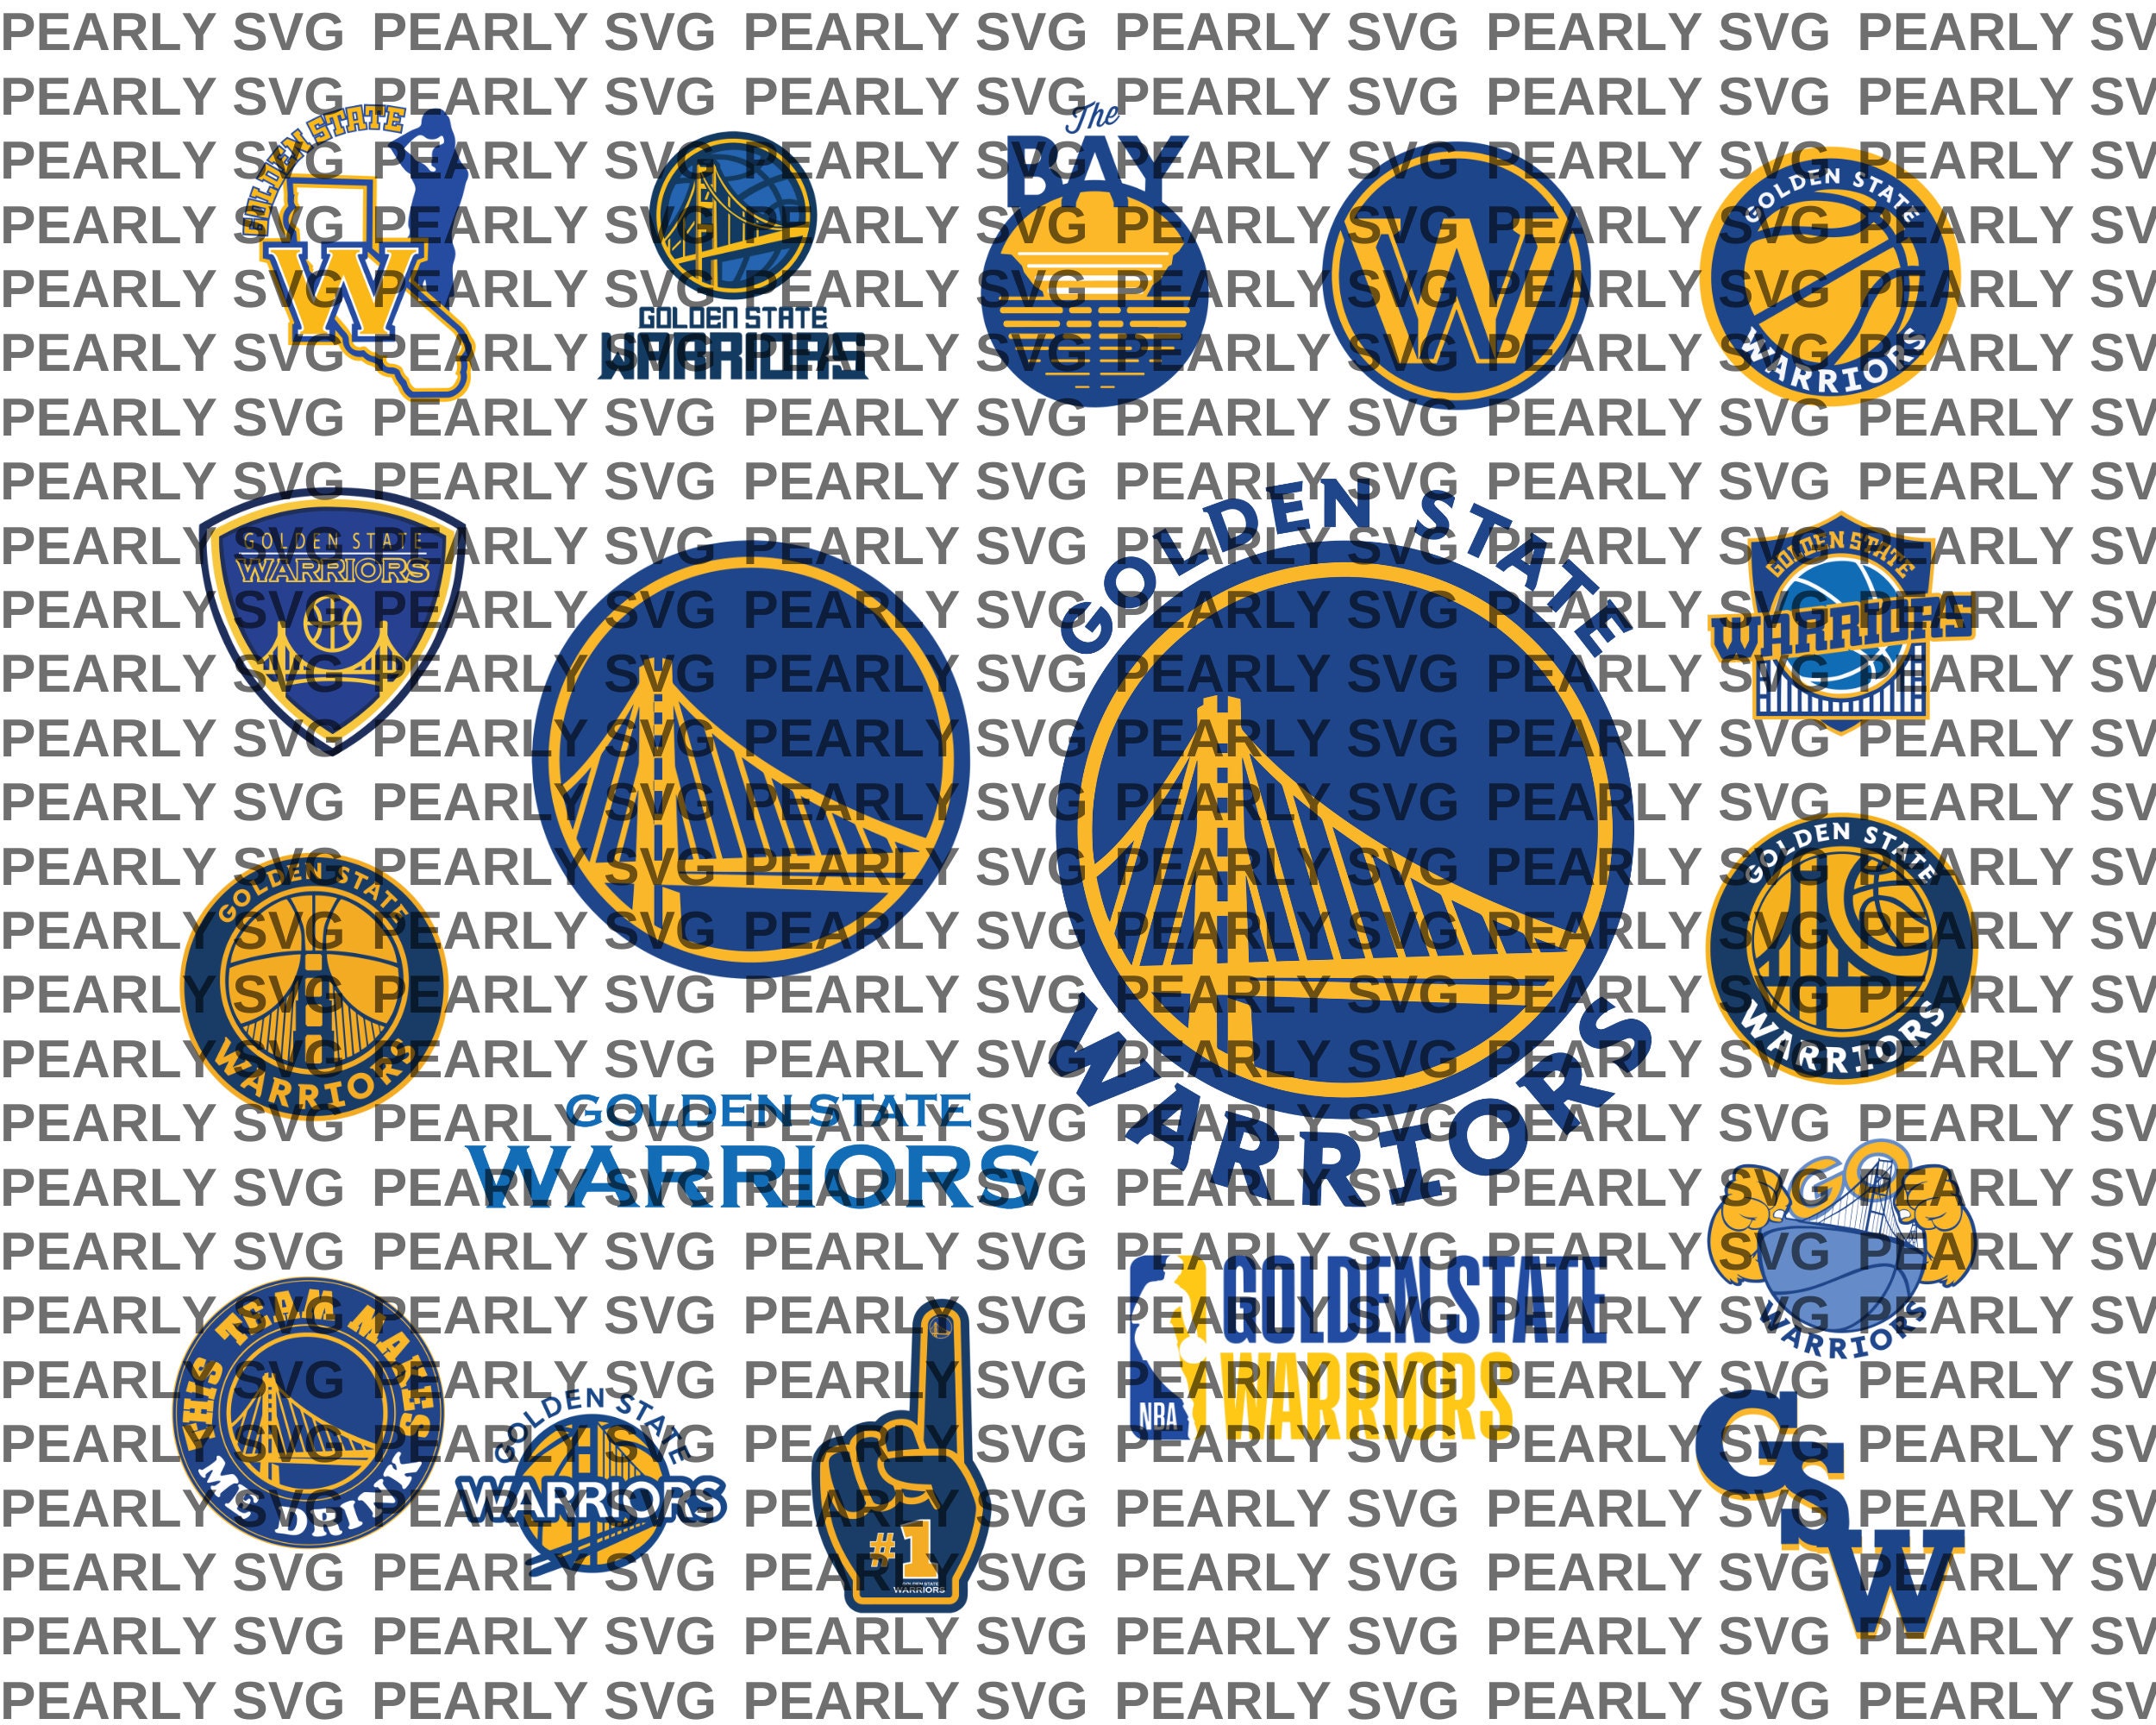 Golden State Warriors NBA Personalized Edible Cake Topper